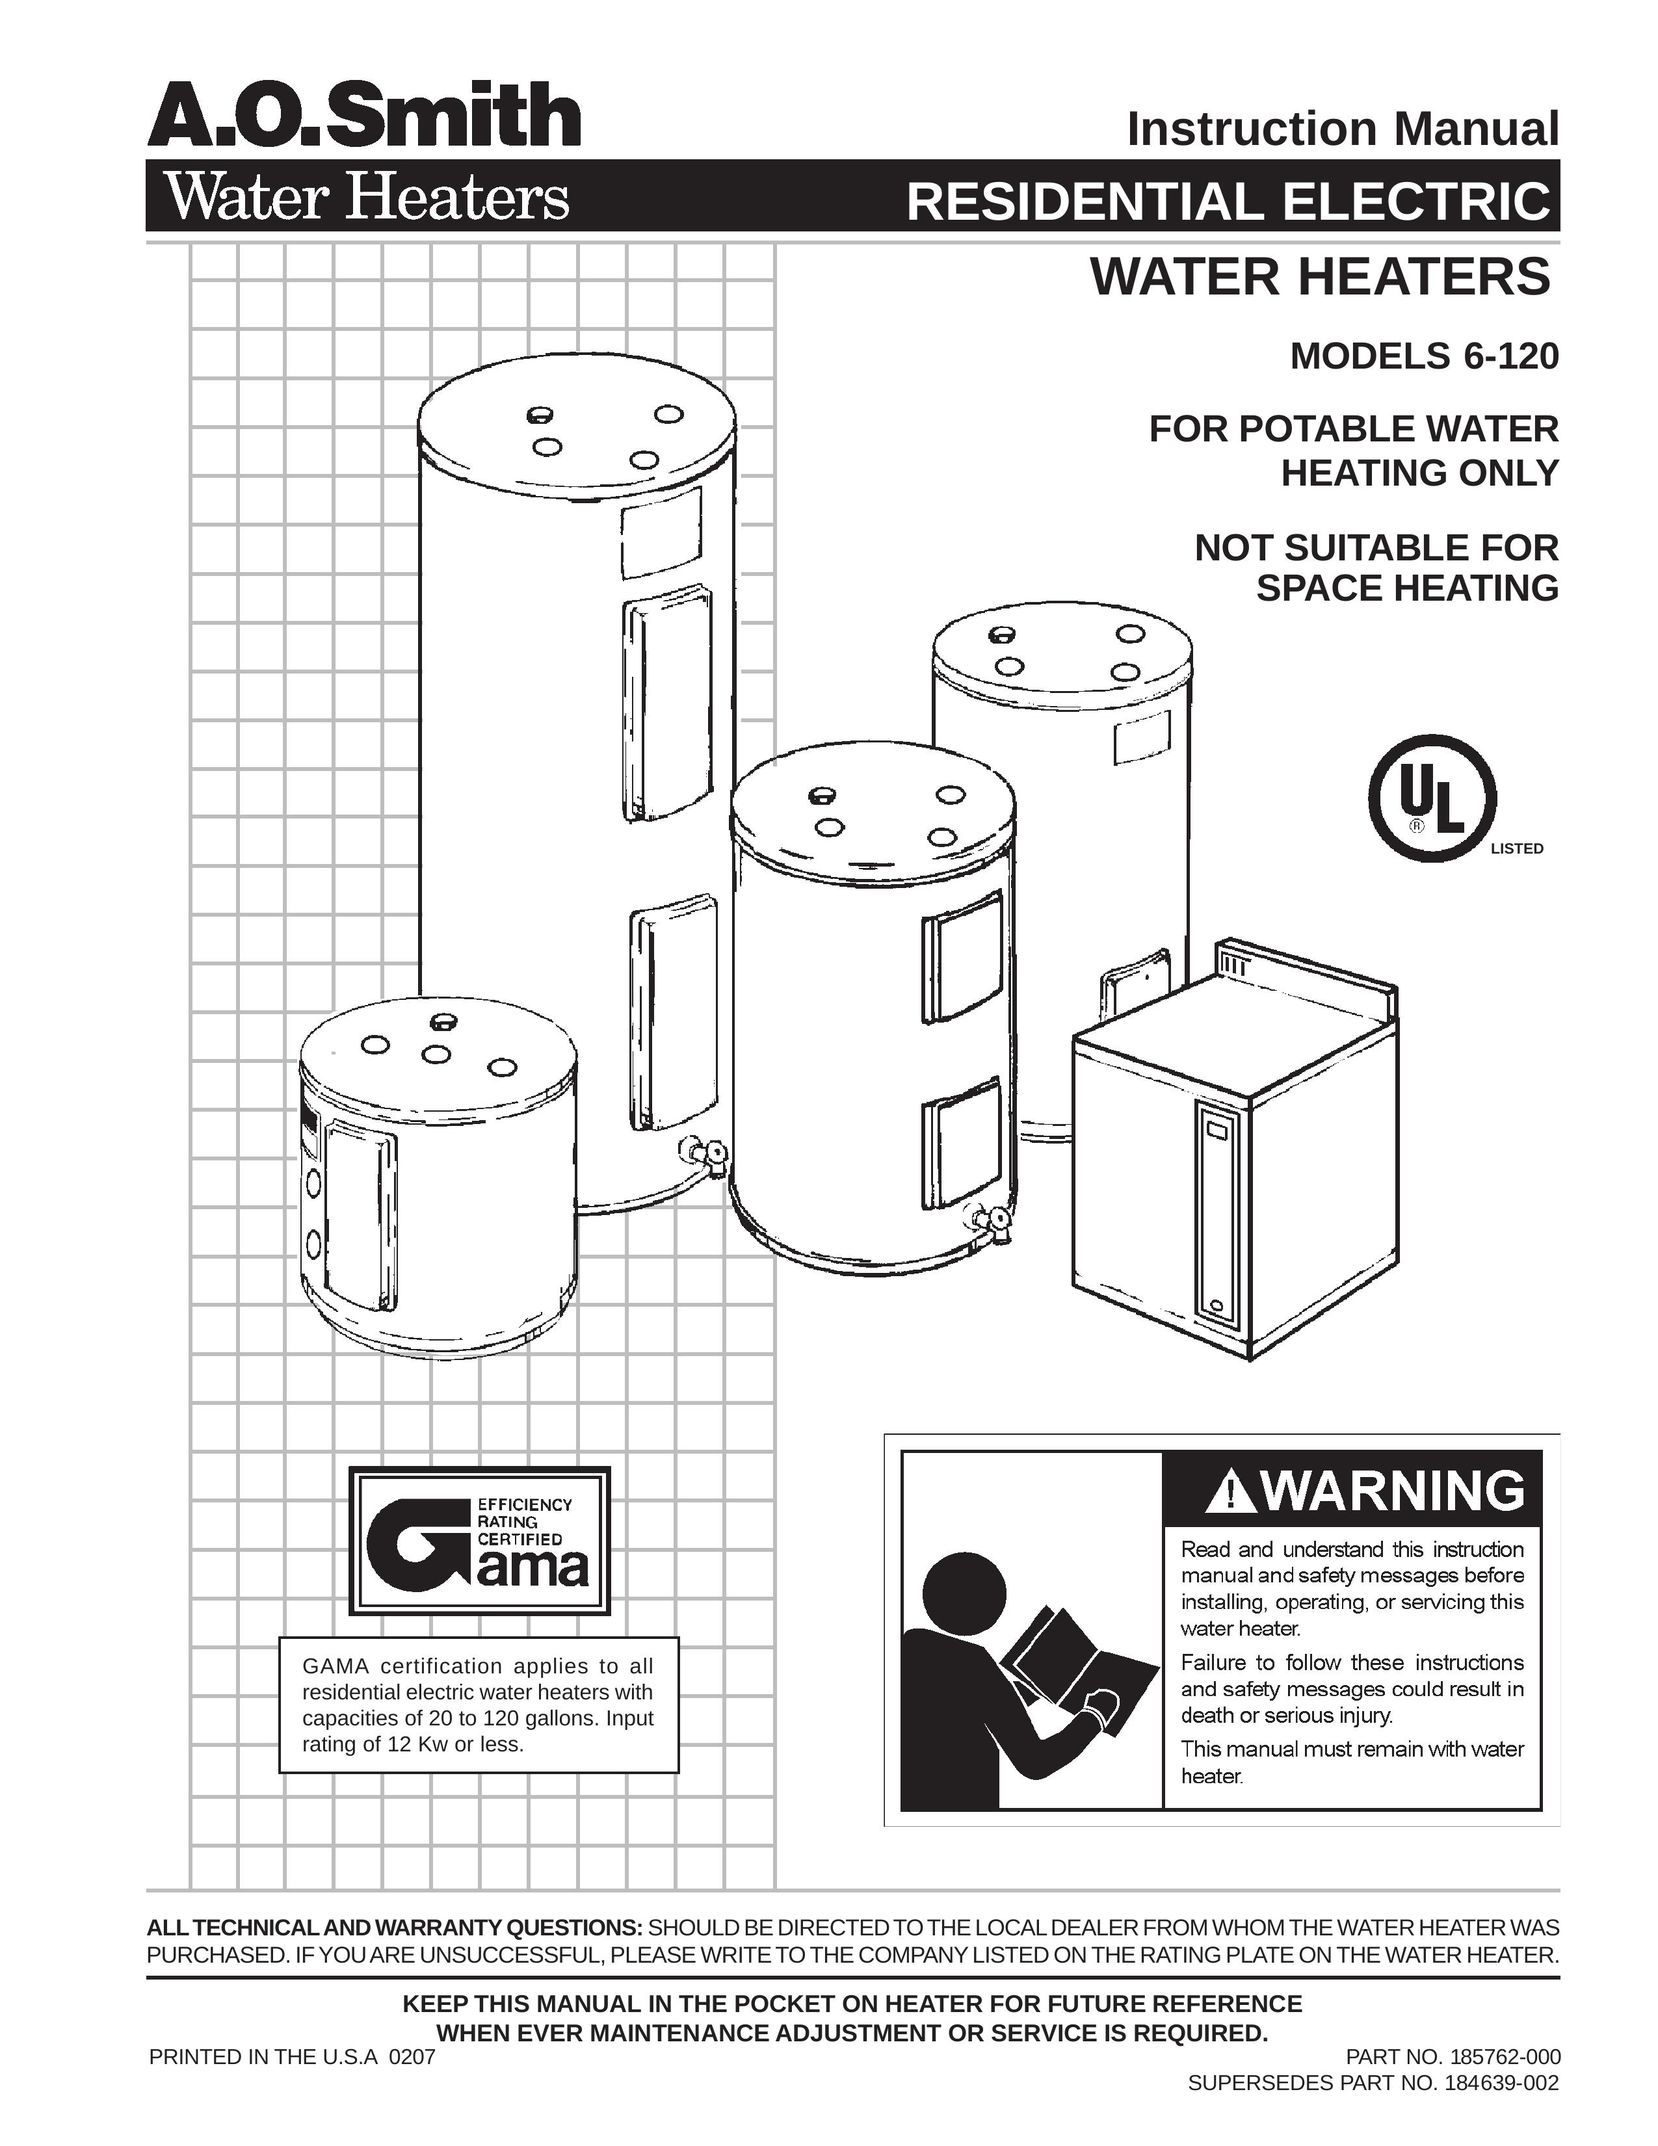 A.O. Smith 185762-000 Water Heater User Manual